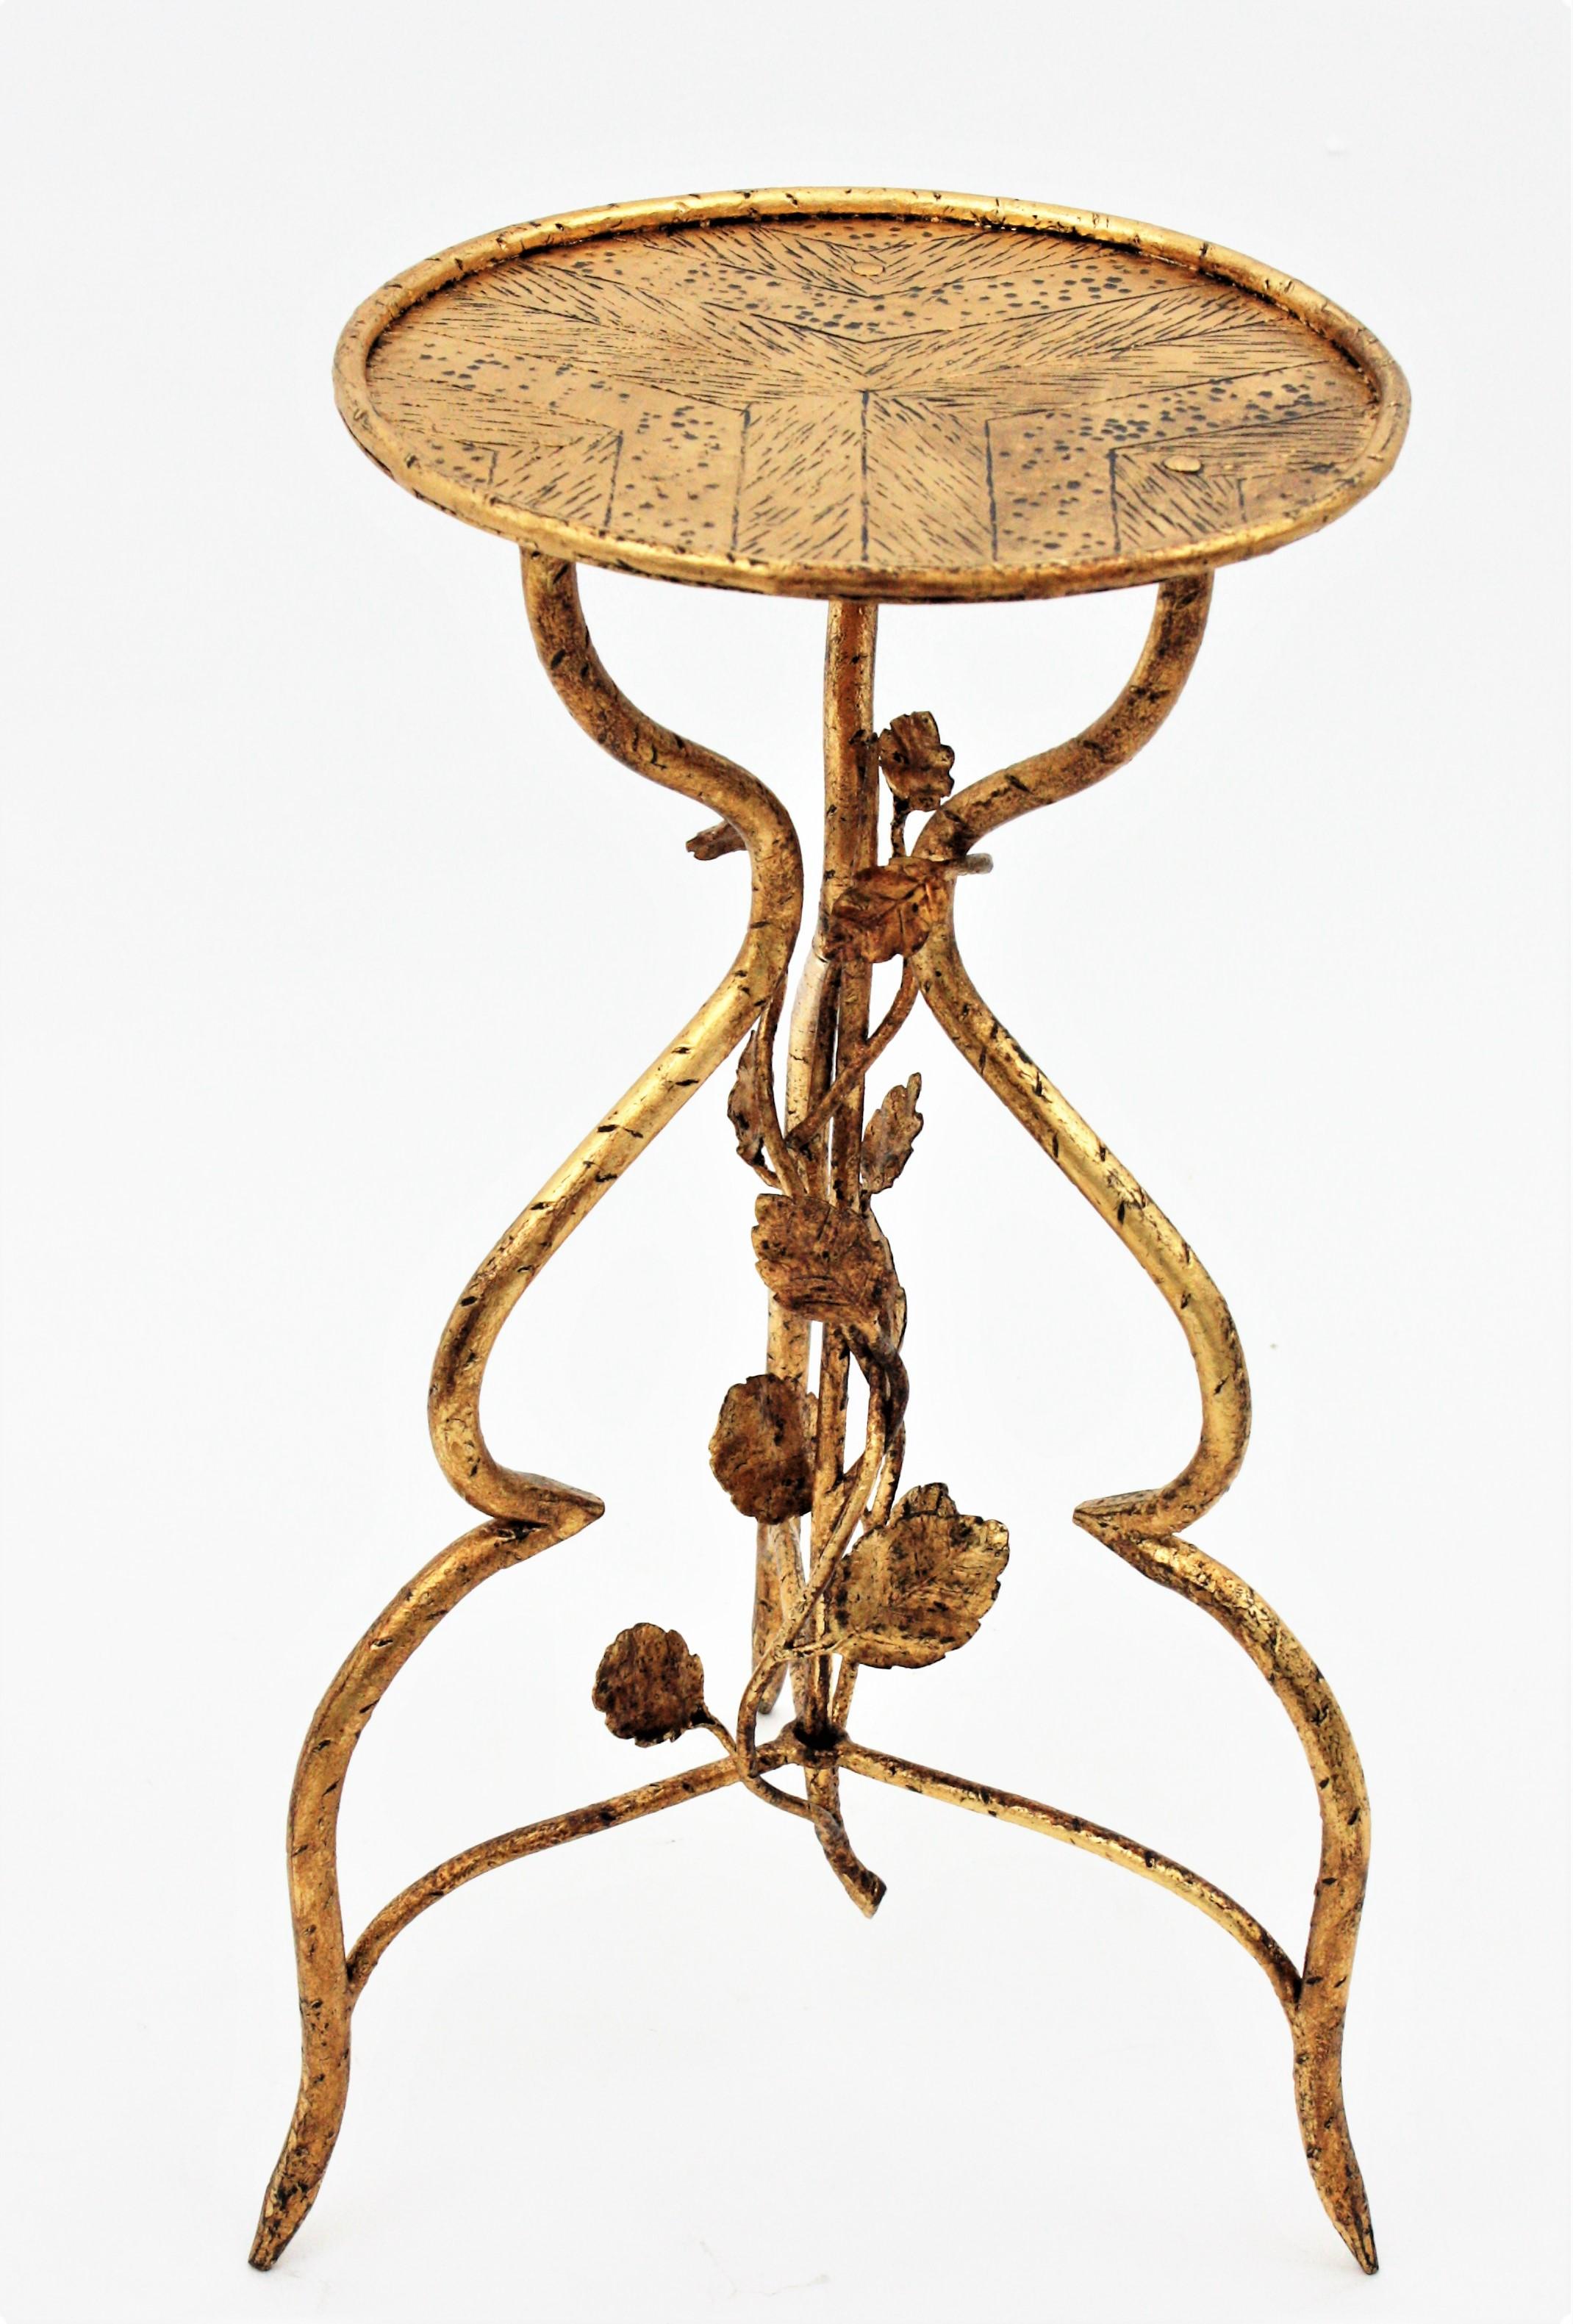 French gilt wrought iron guéridon table stand or drinks table with naturalistic design, 1920s-1930s.
Eye-catching guéridon table handcrafted in wrought iron and finished in gold leaf gilding. The top has a beautiful design richly adorned with the